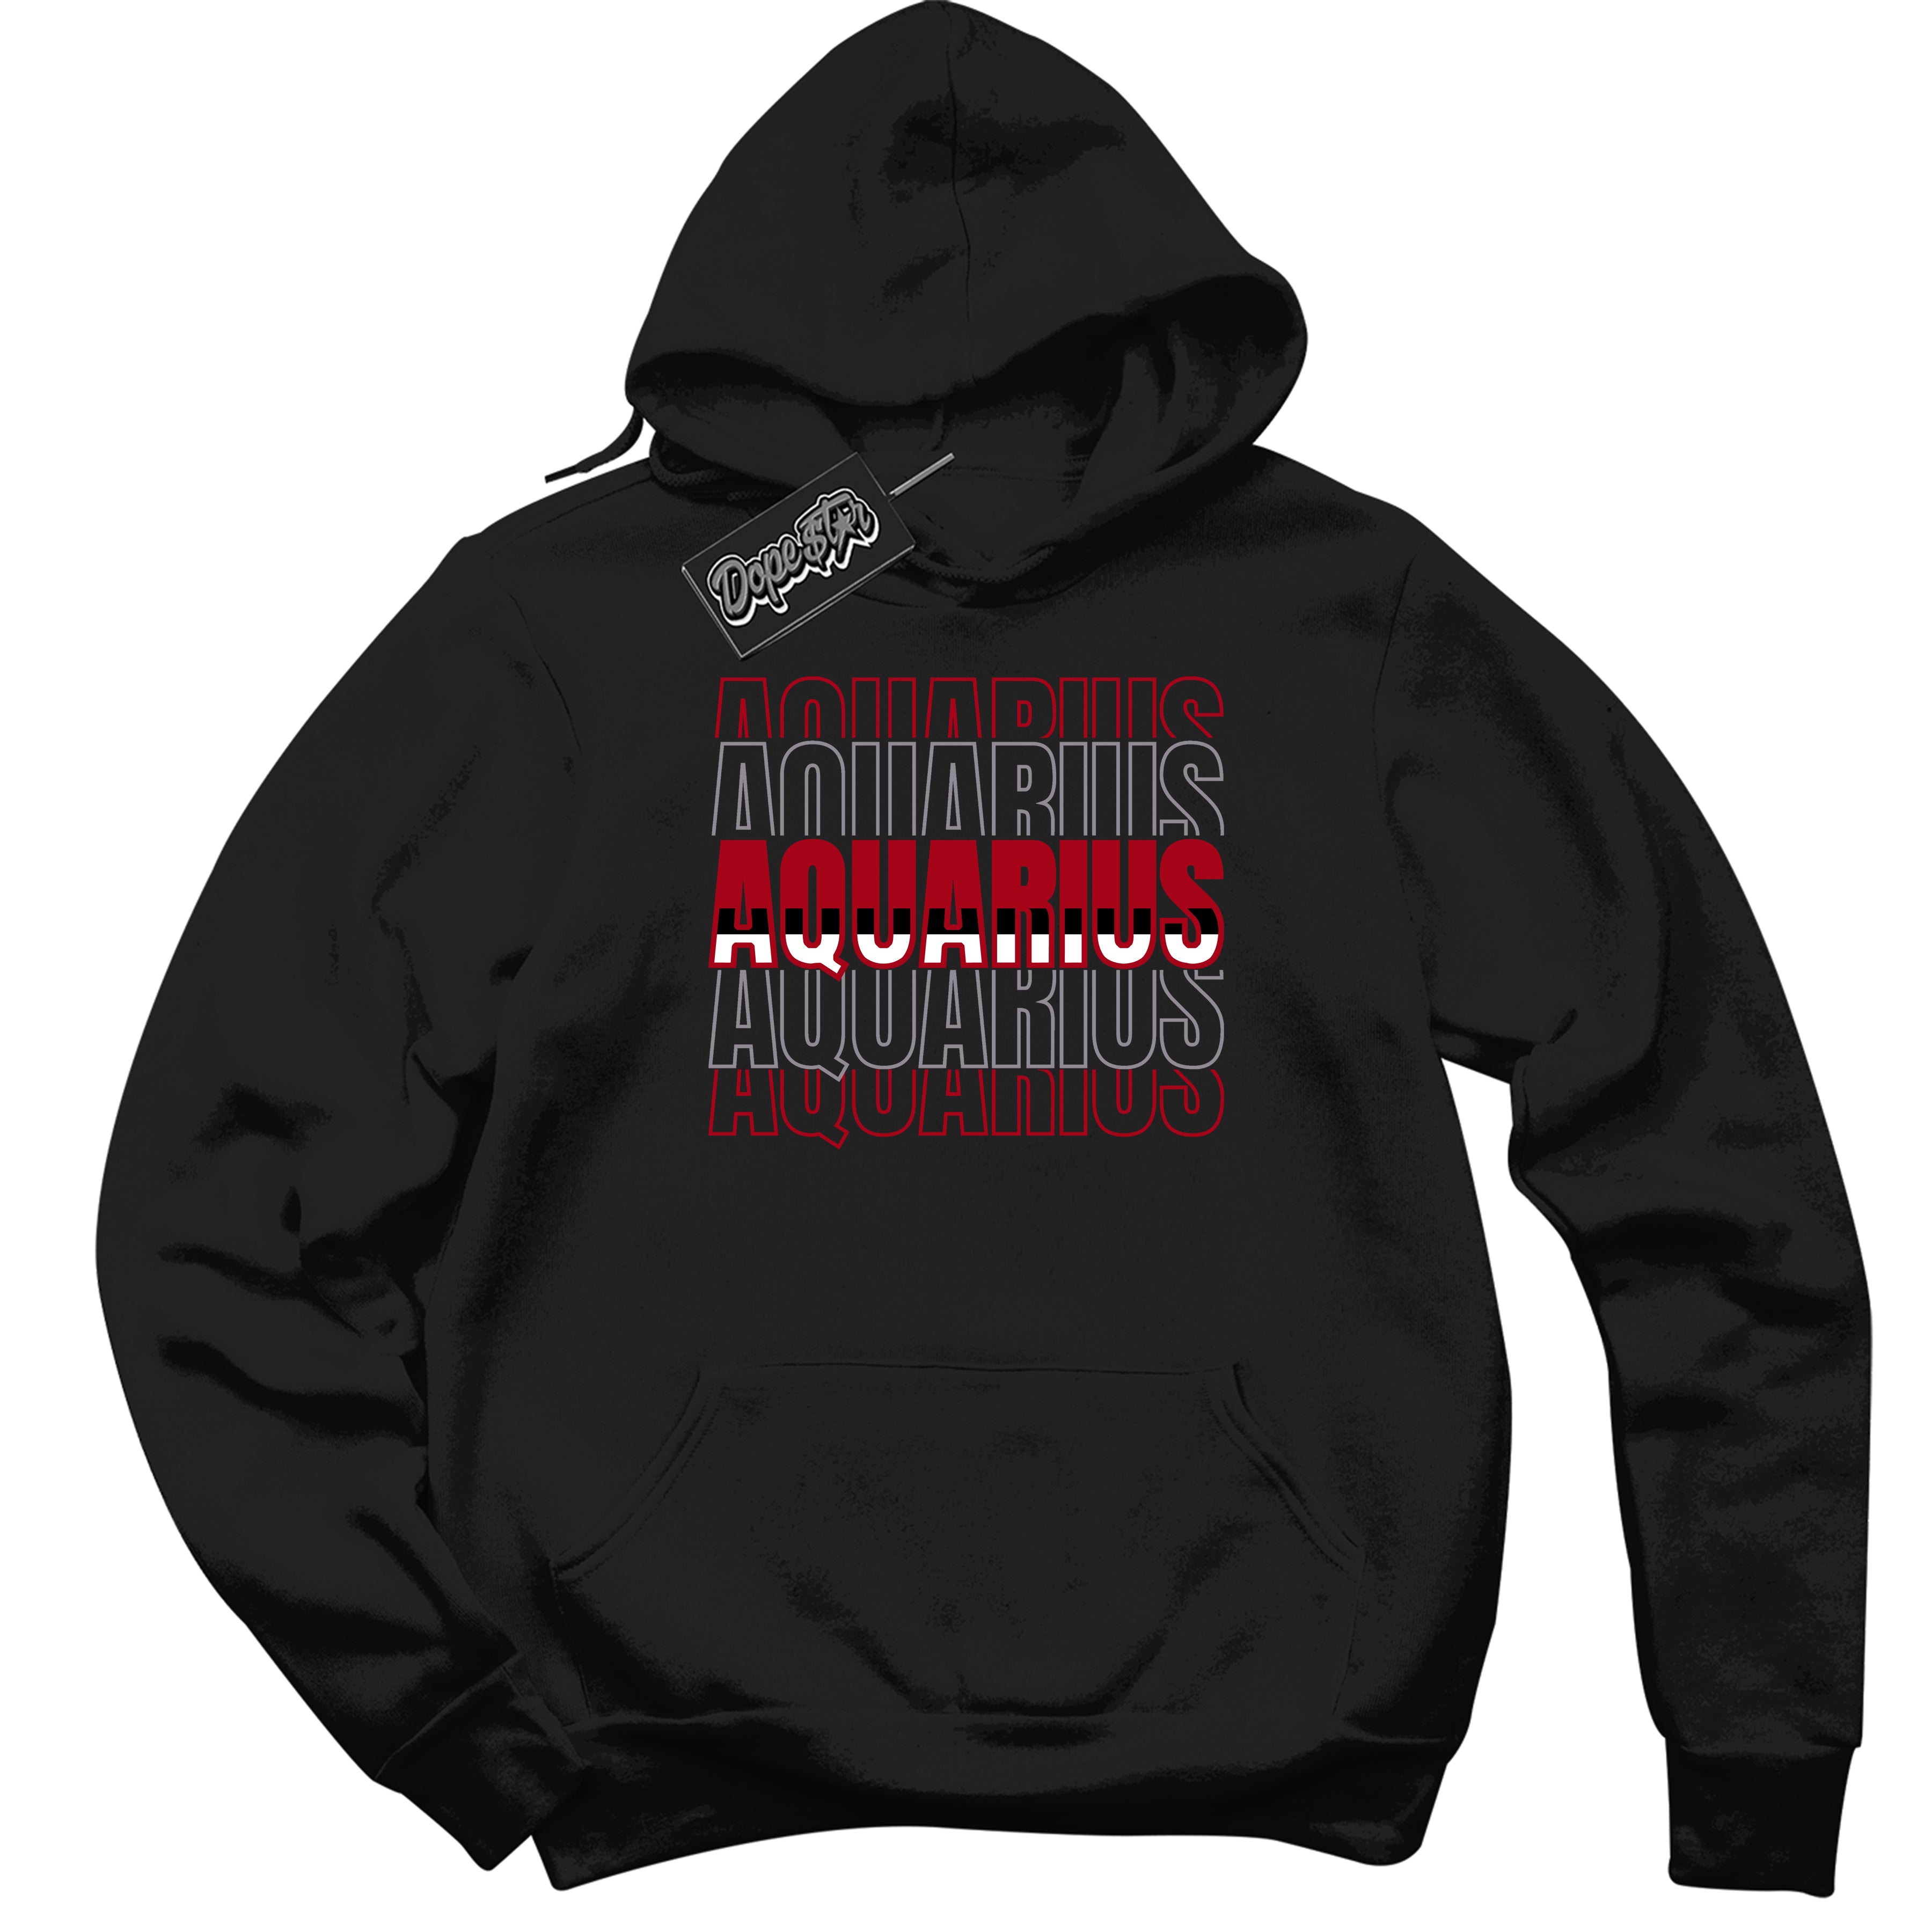 Cool Black Hoodie with “ Aquarius ”  design that Perfectly Matches  Bred Reimagined 4s Jordans.